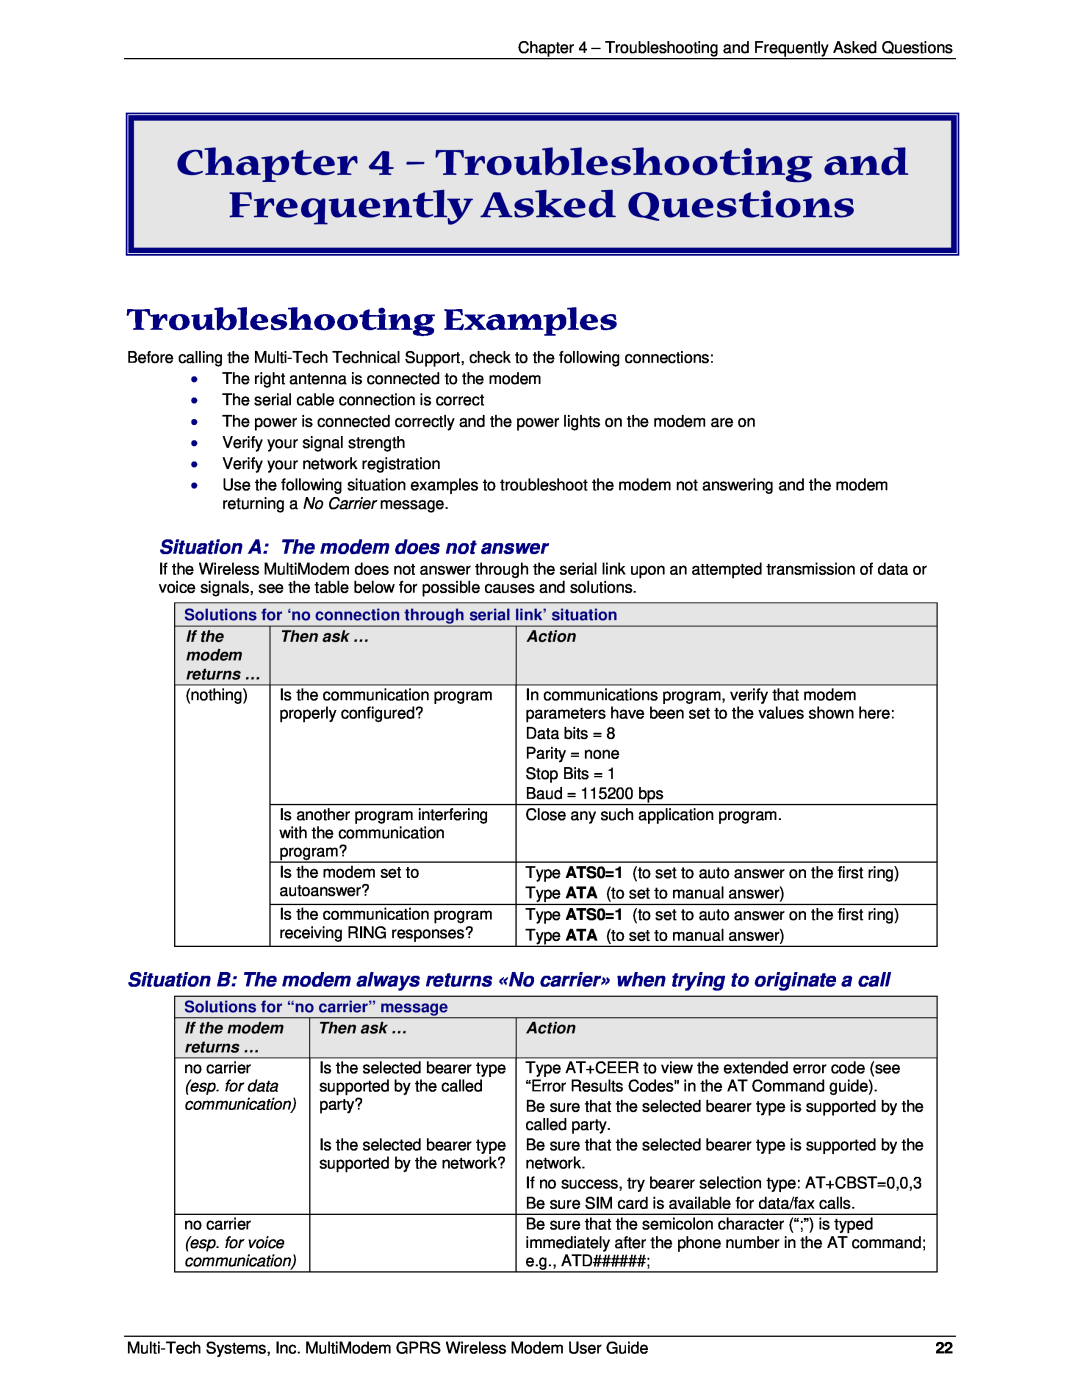 Multi-Tech Systems MTCBA-G-F1 Troubleshooting and Frequently Asked Questions, Troubleshooting Examples, If the, Then ask … 